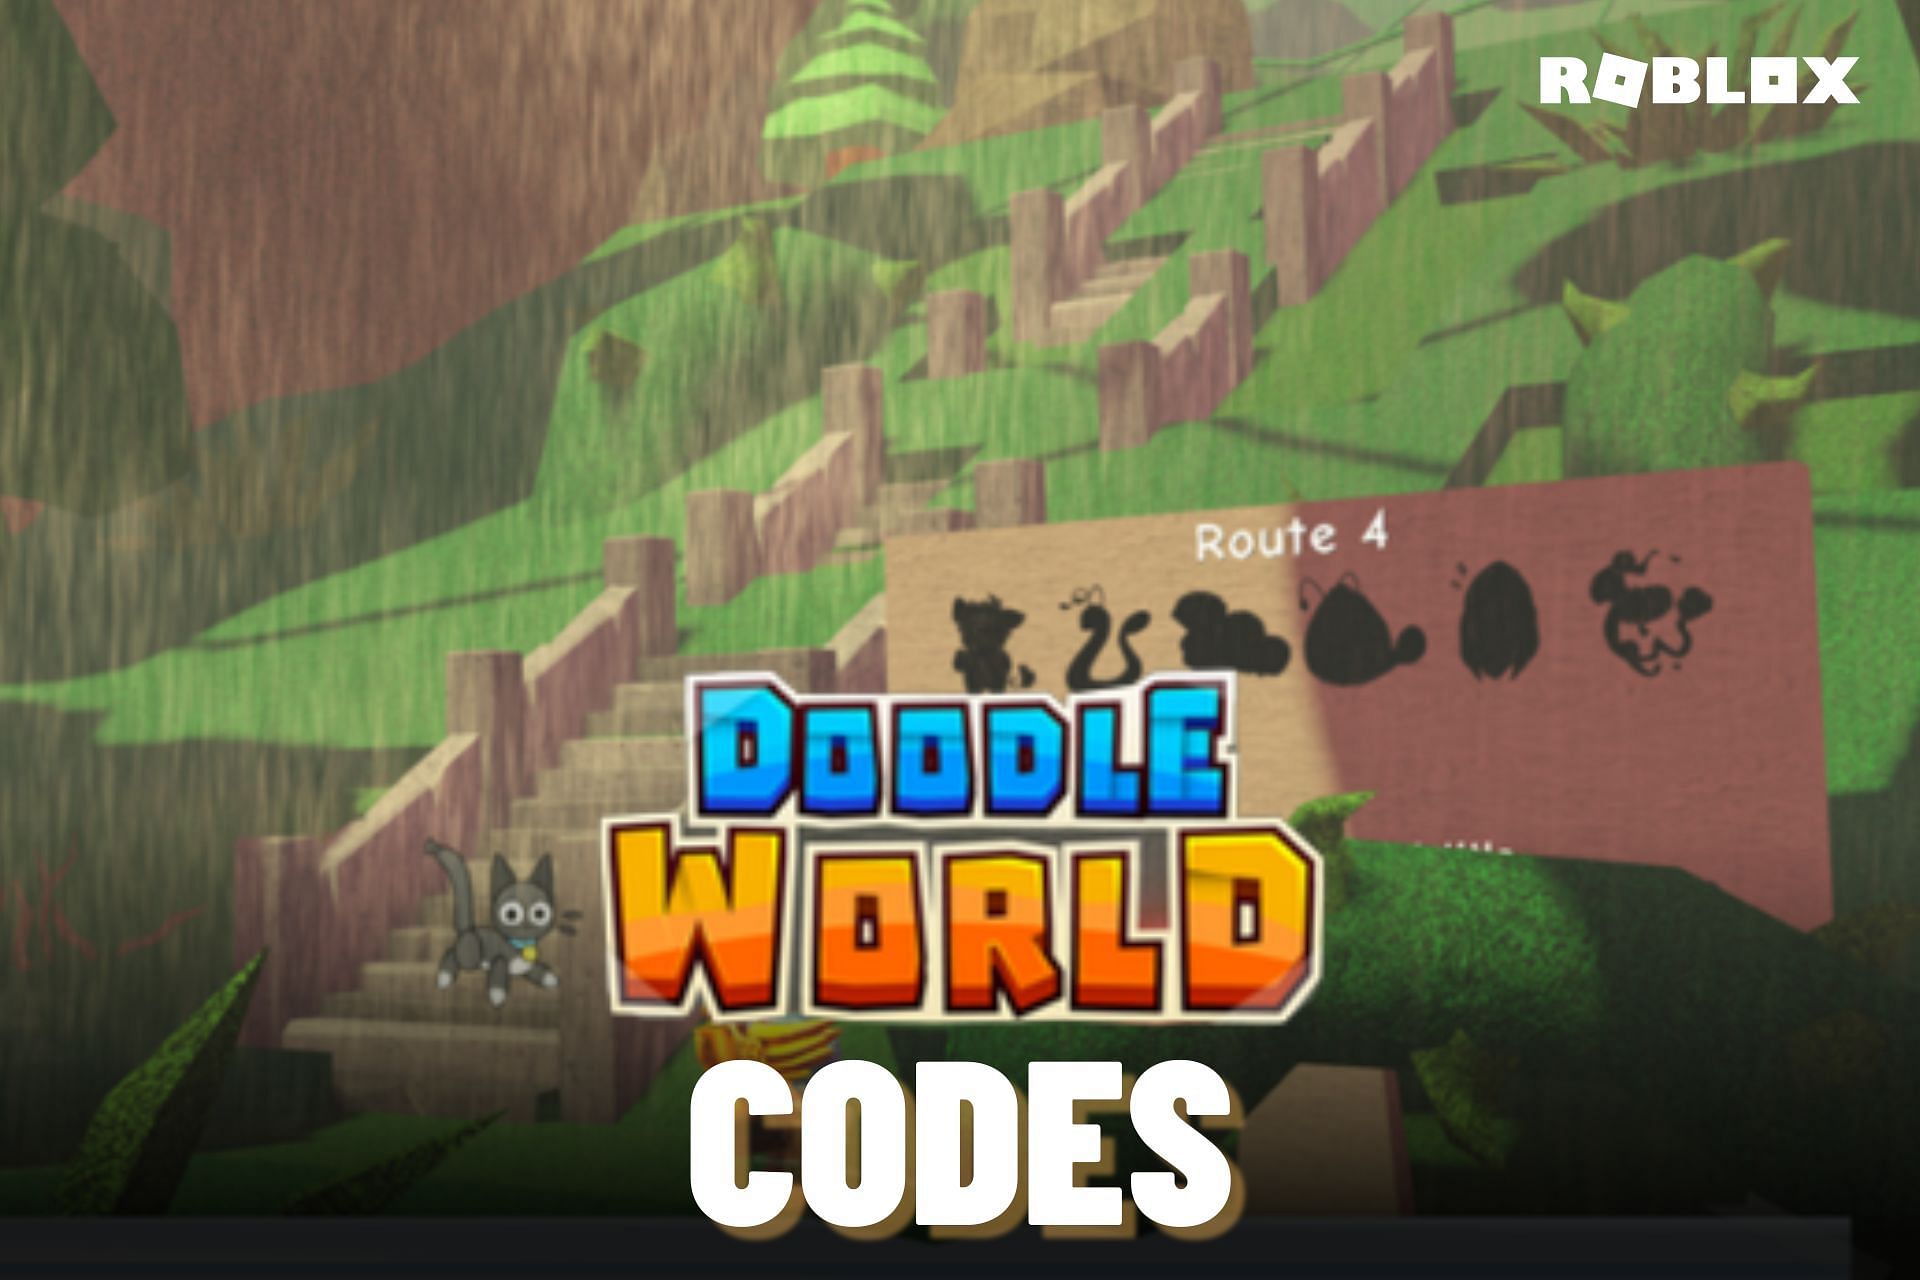 Roblox Doodle World codes in November 2022: Free Gems, Cash, and more